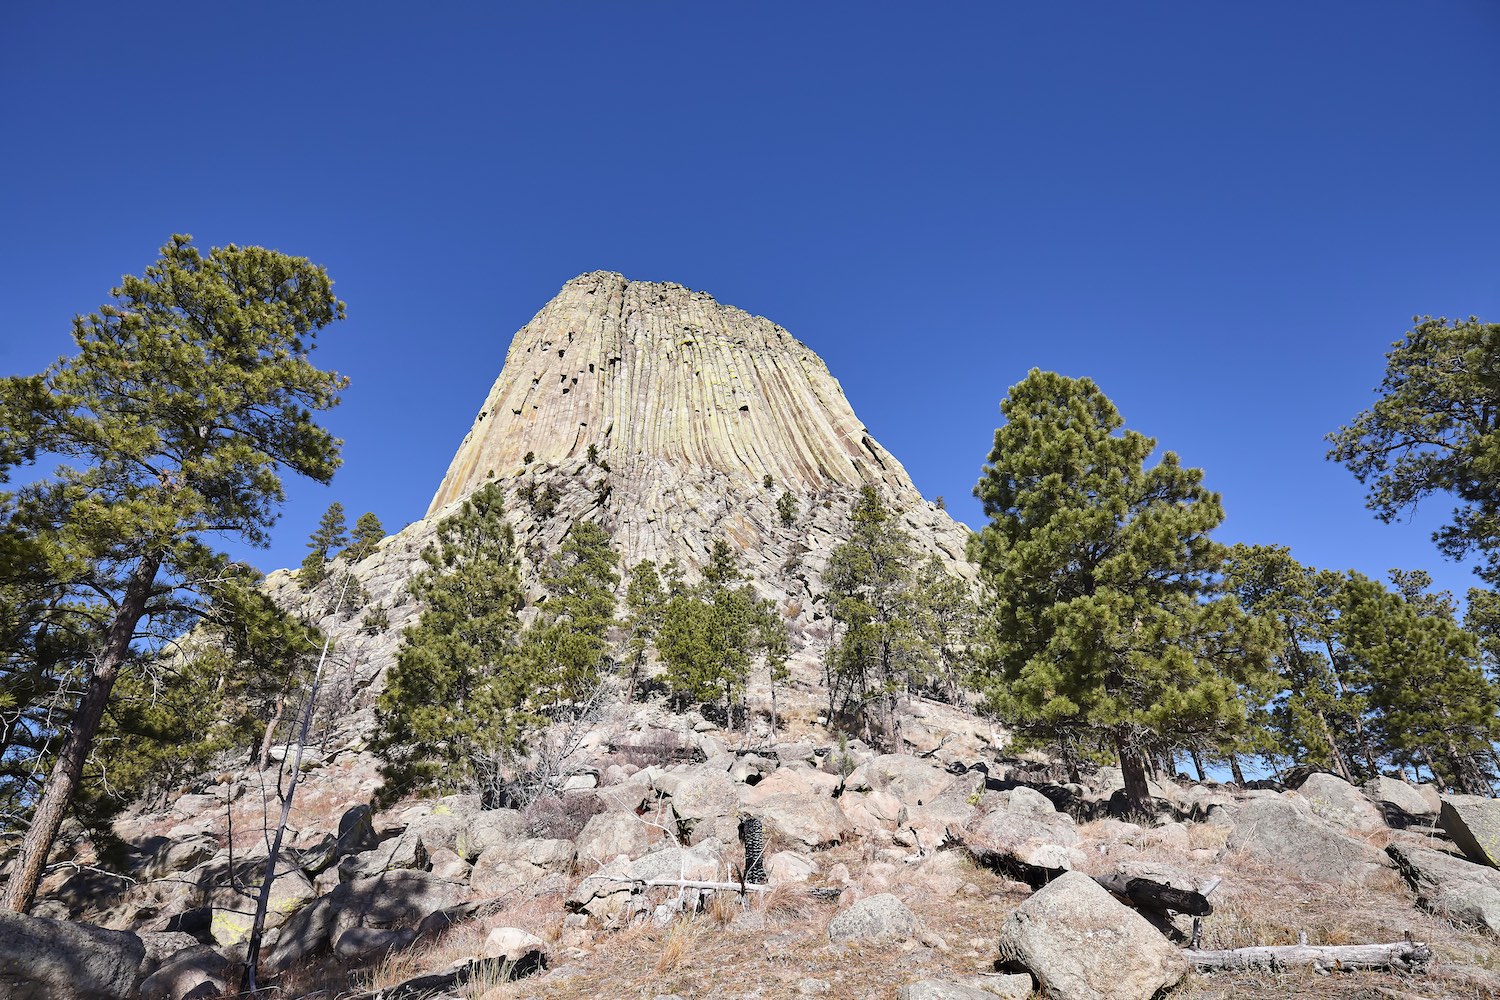 Devils Tower, a laccolith butte composed of igneous rock in the Bear Lodge Mountains, top attraction in Wyoming State, USA.